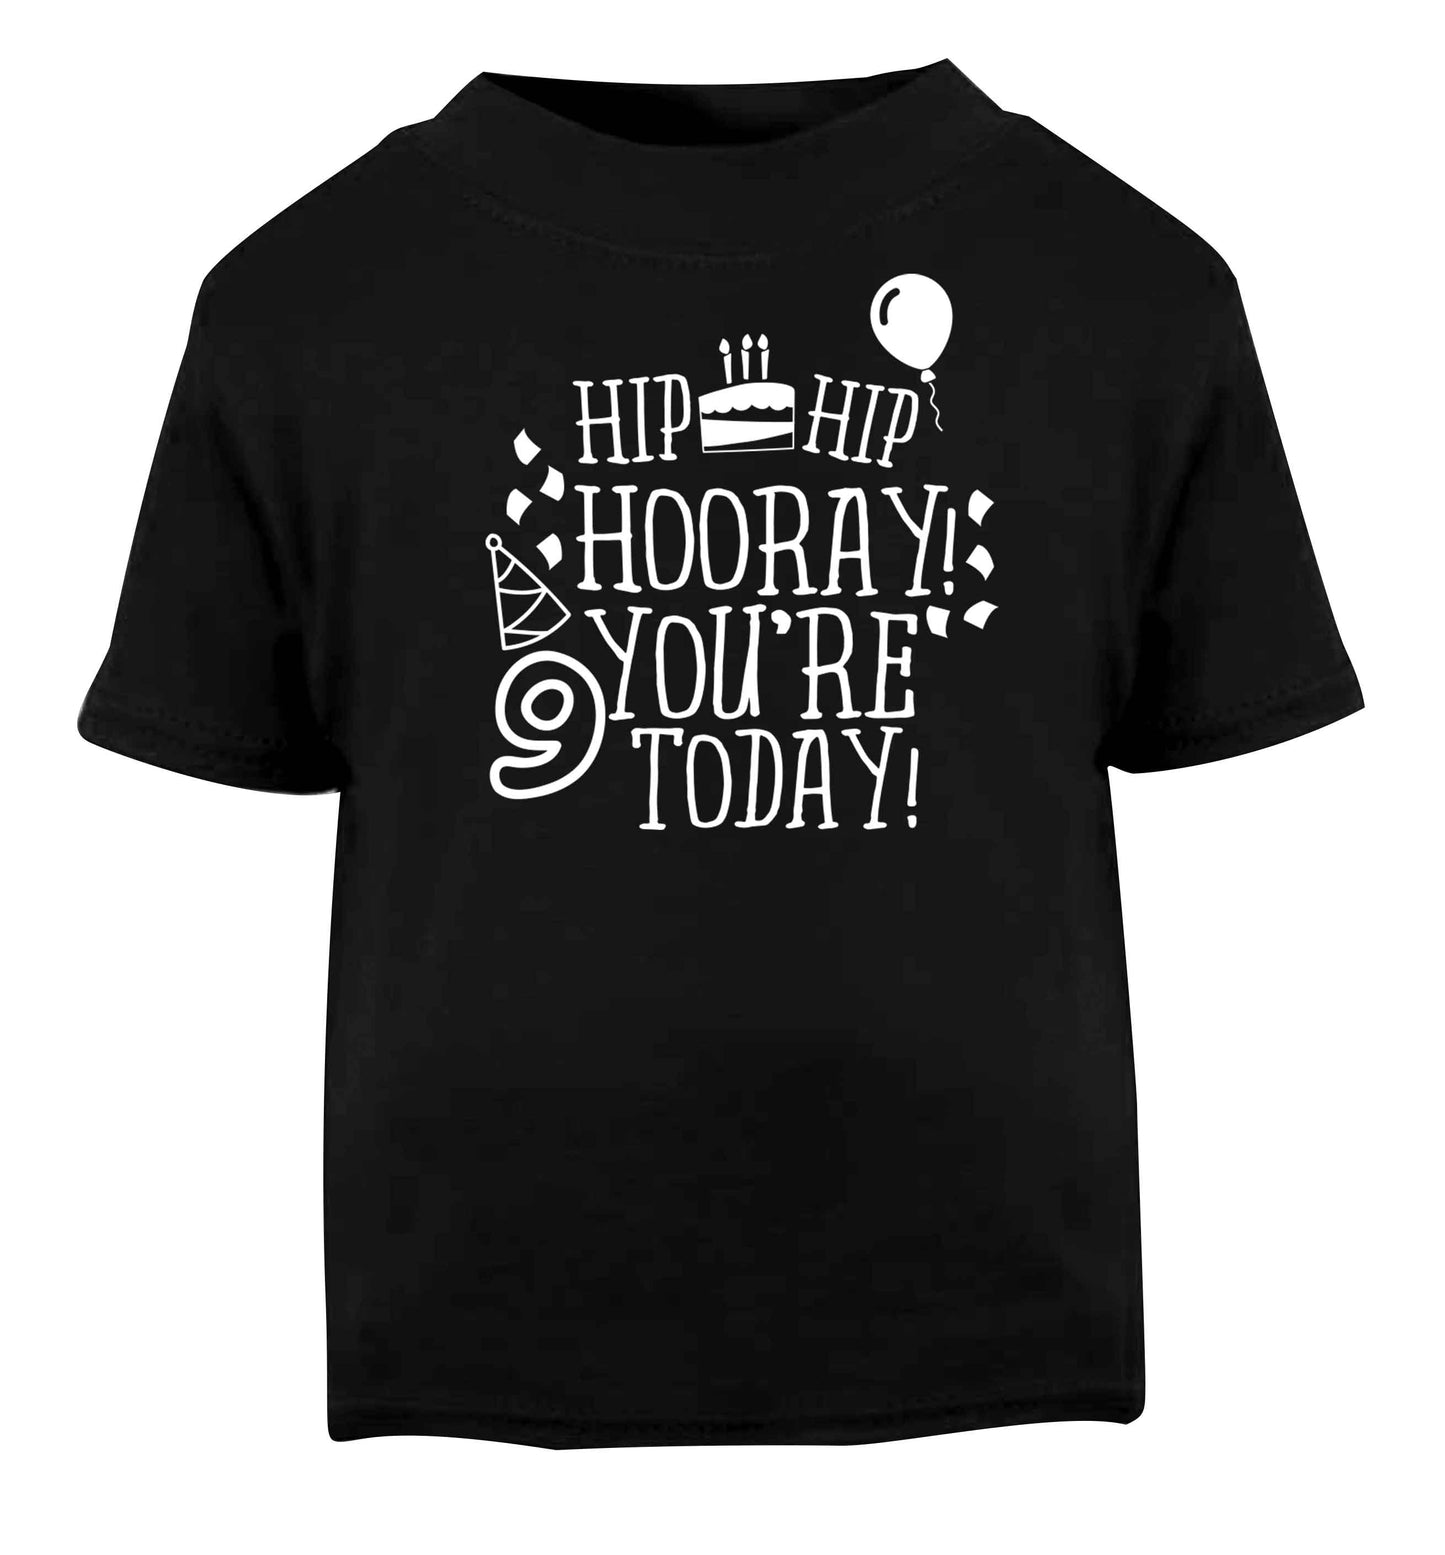 Hip hip hooray you're 9 today! Black baby toddler Tshirt 2 years